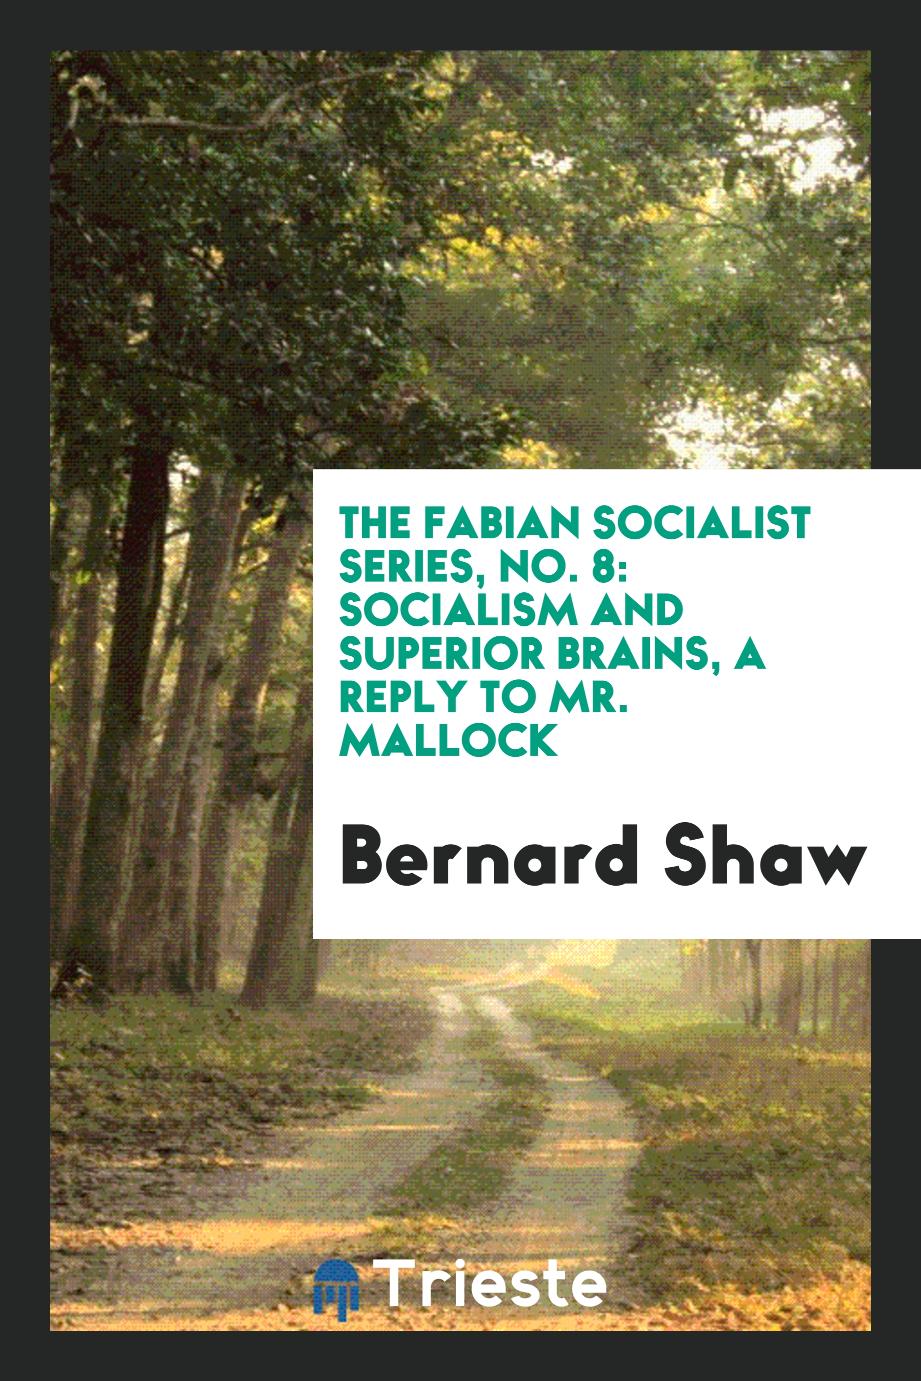 The Fabian Socialist Series, No. 8: Socialism and Superior Brains, A Reply to Mr. Mallock